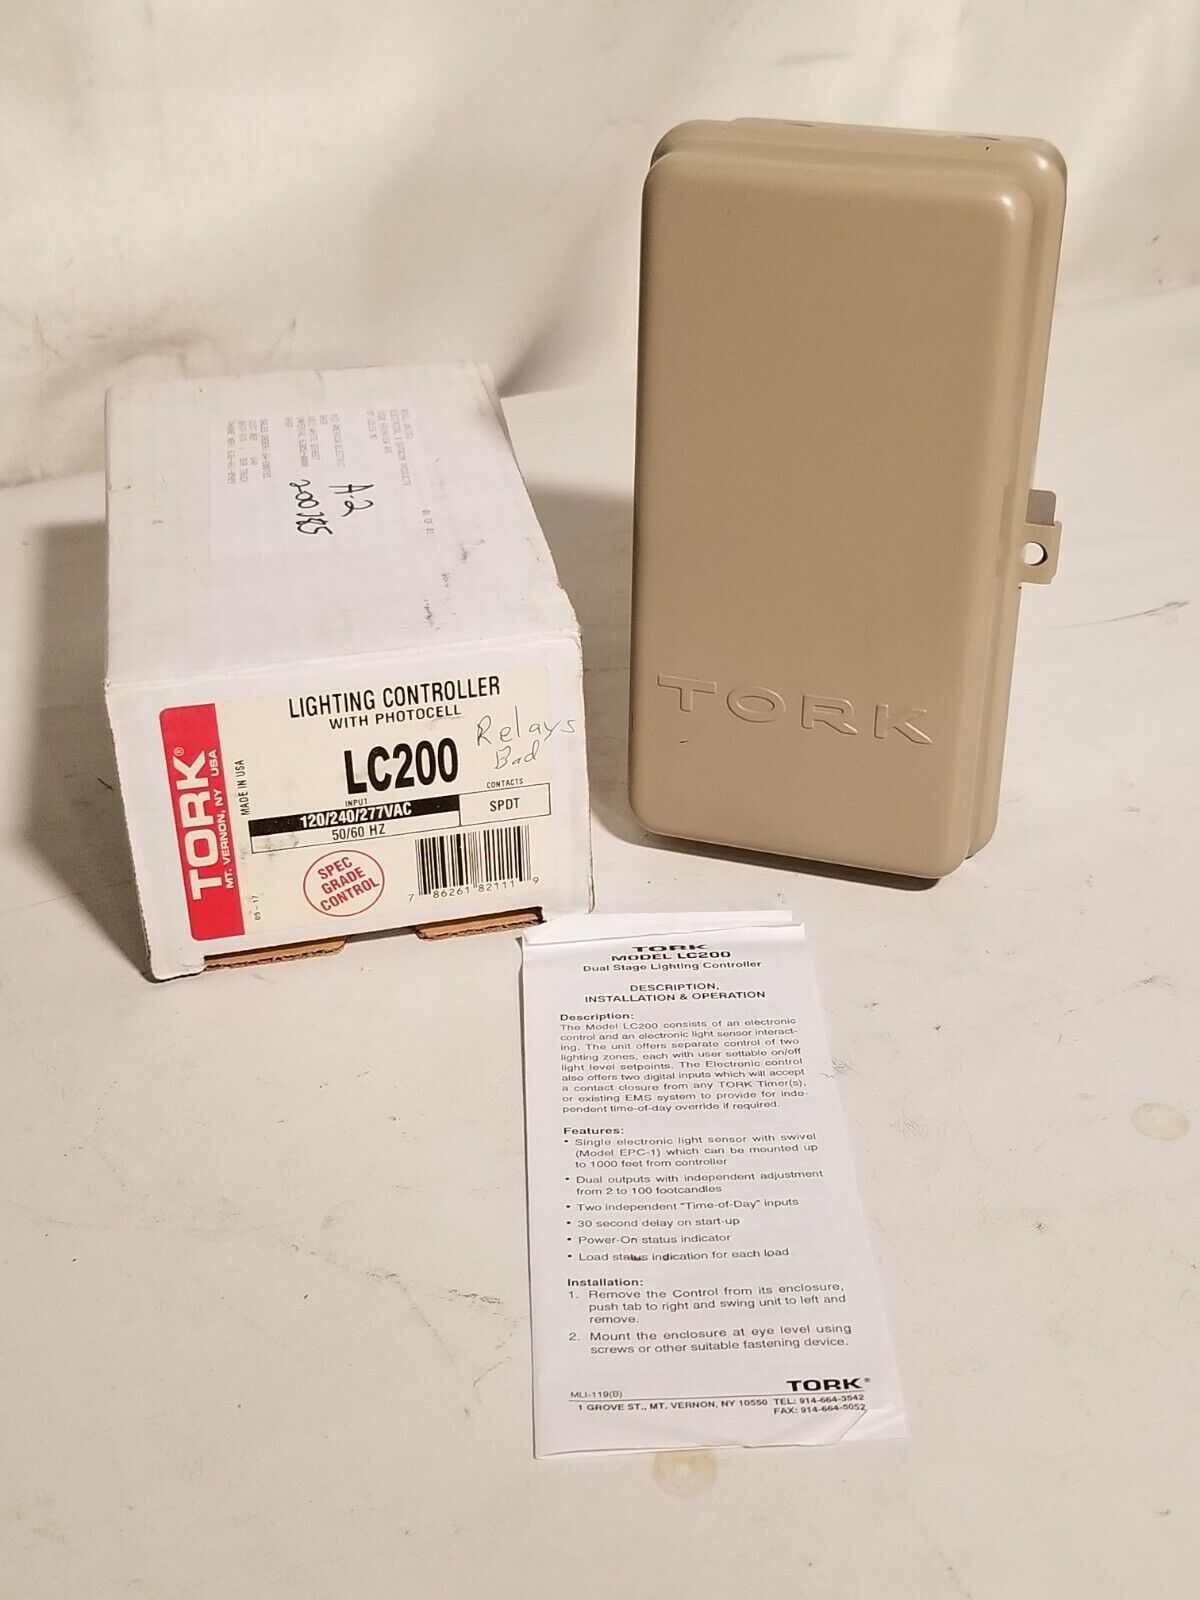 Tork LC200 lighting controller with EPC1 photocell, bad relays